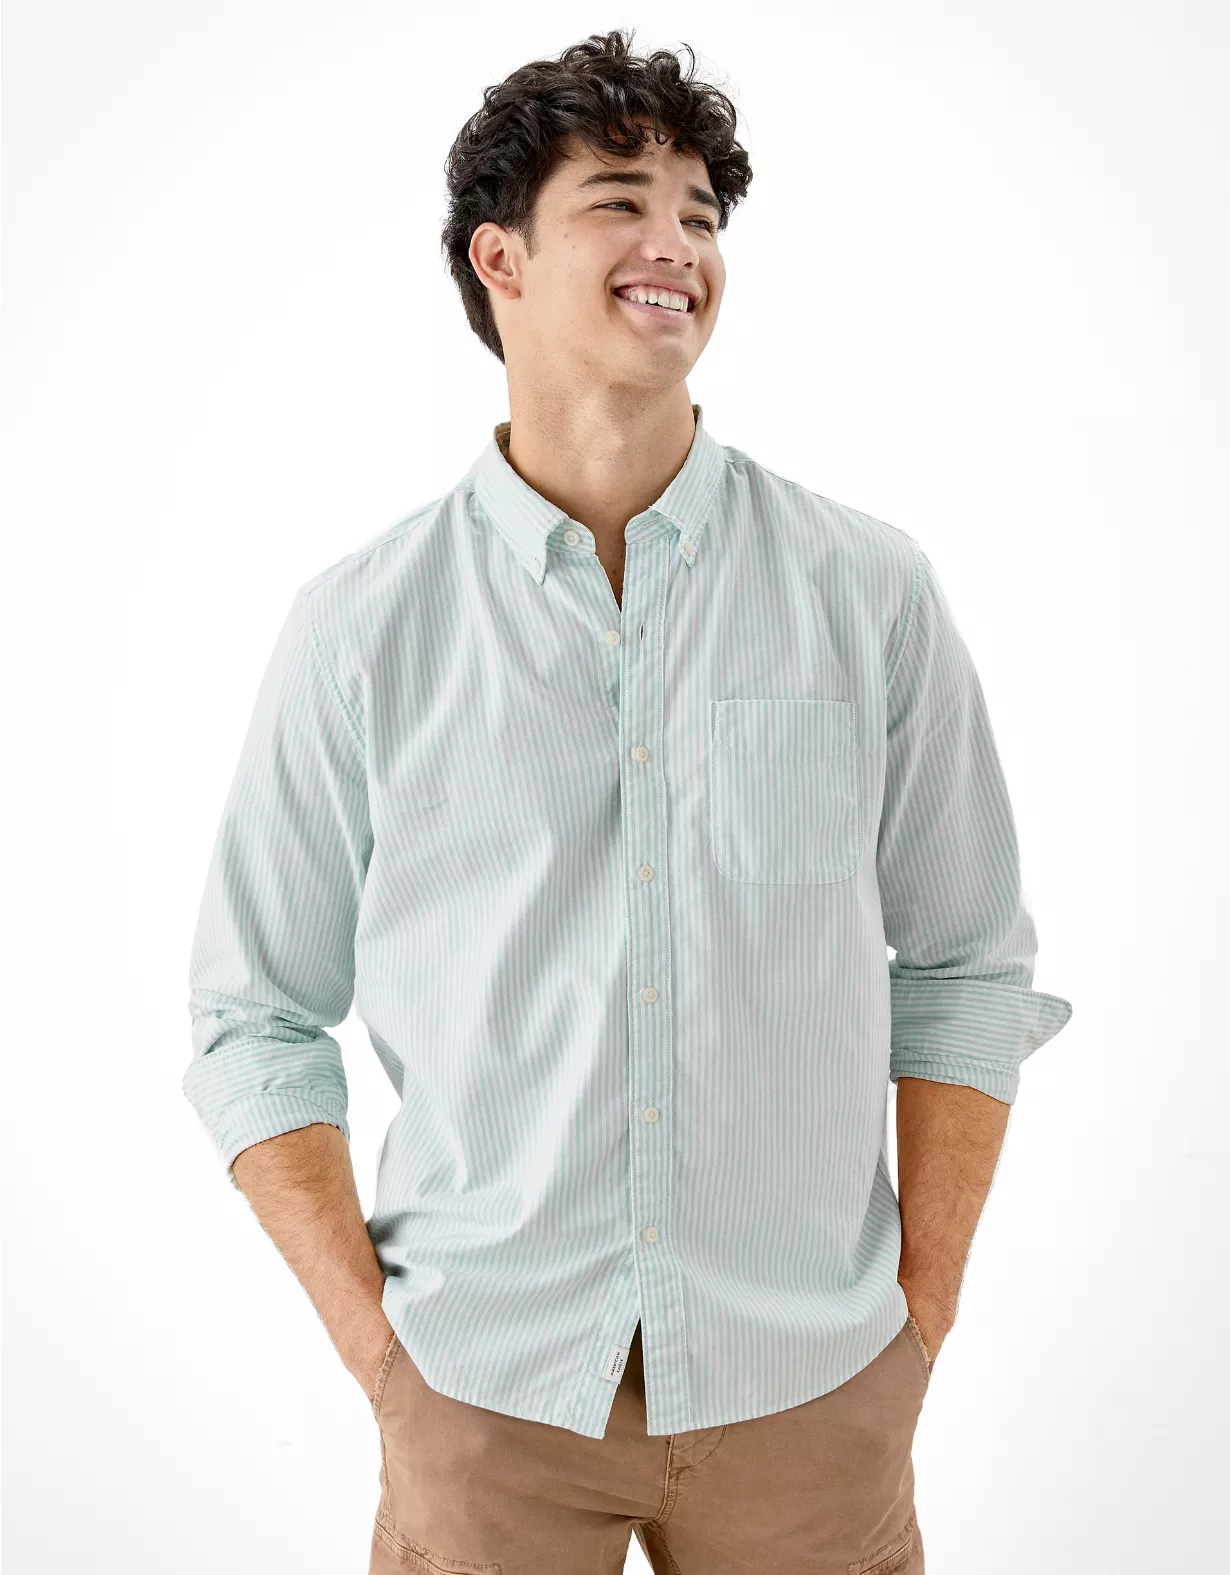 AE Distressed Striped Oxford Button-Up Shirt